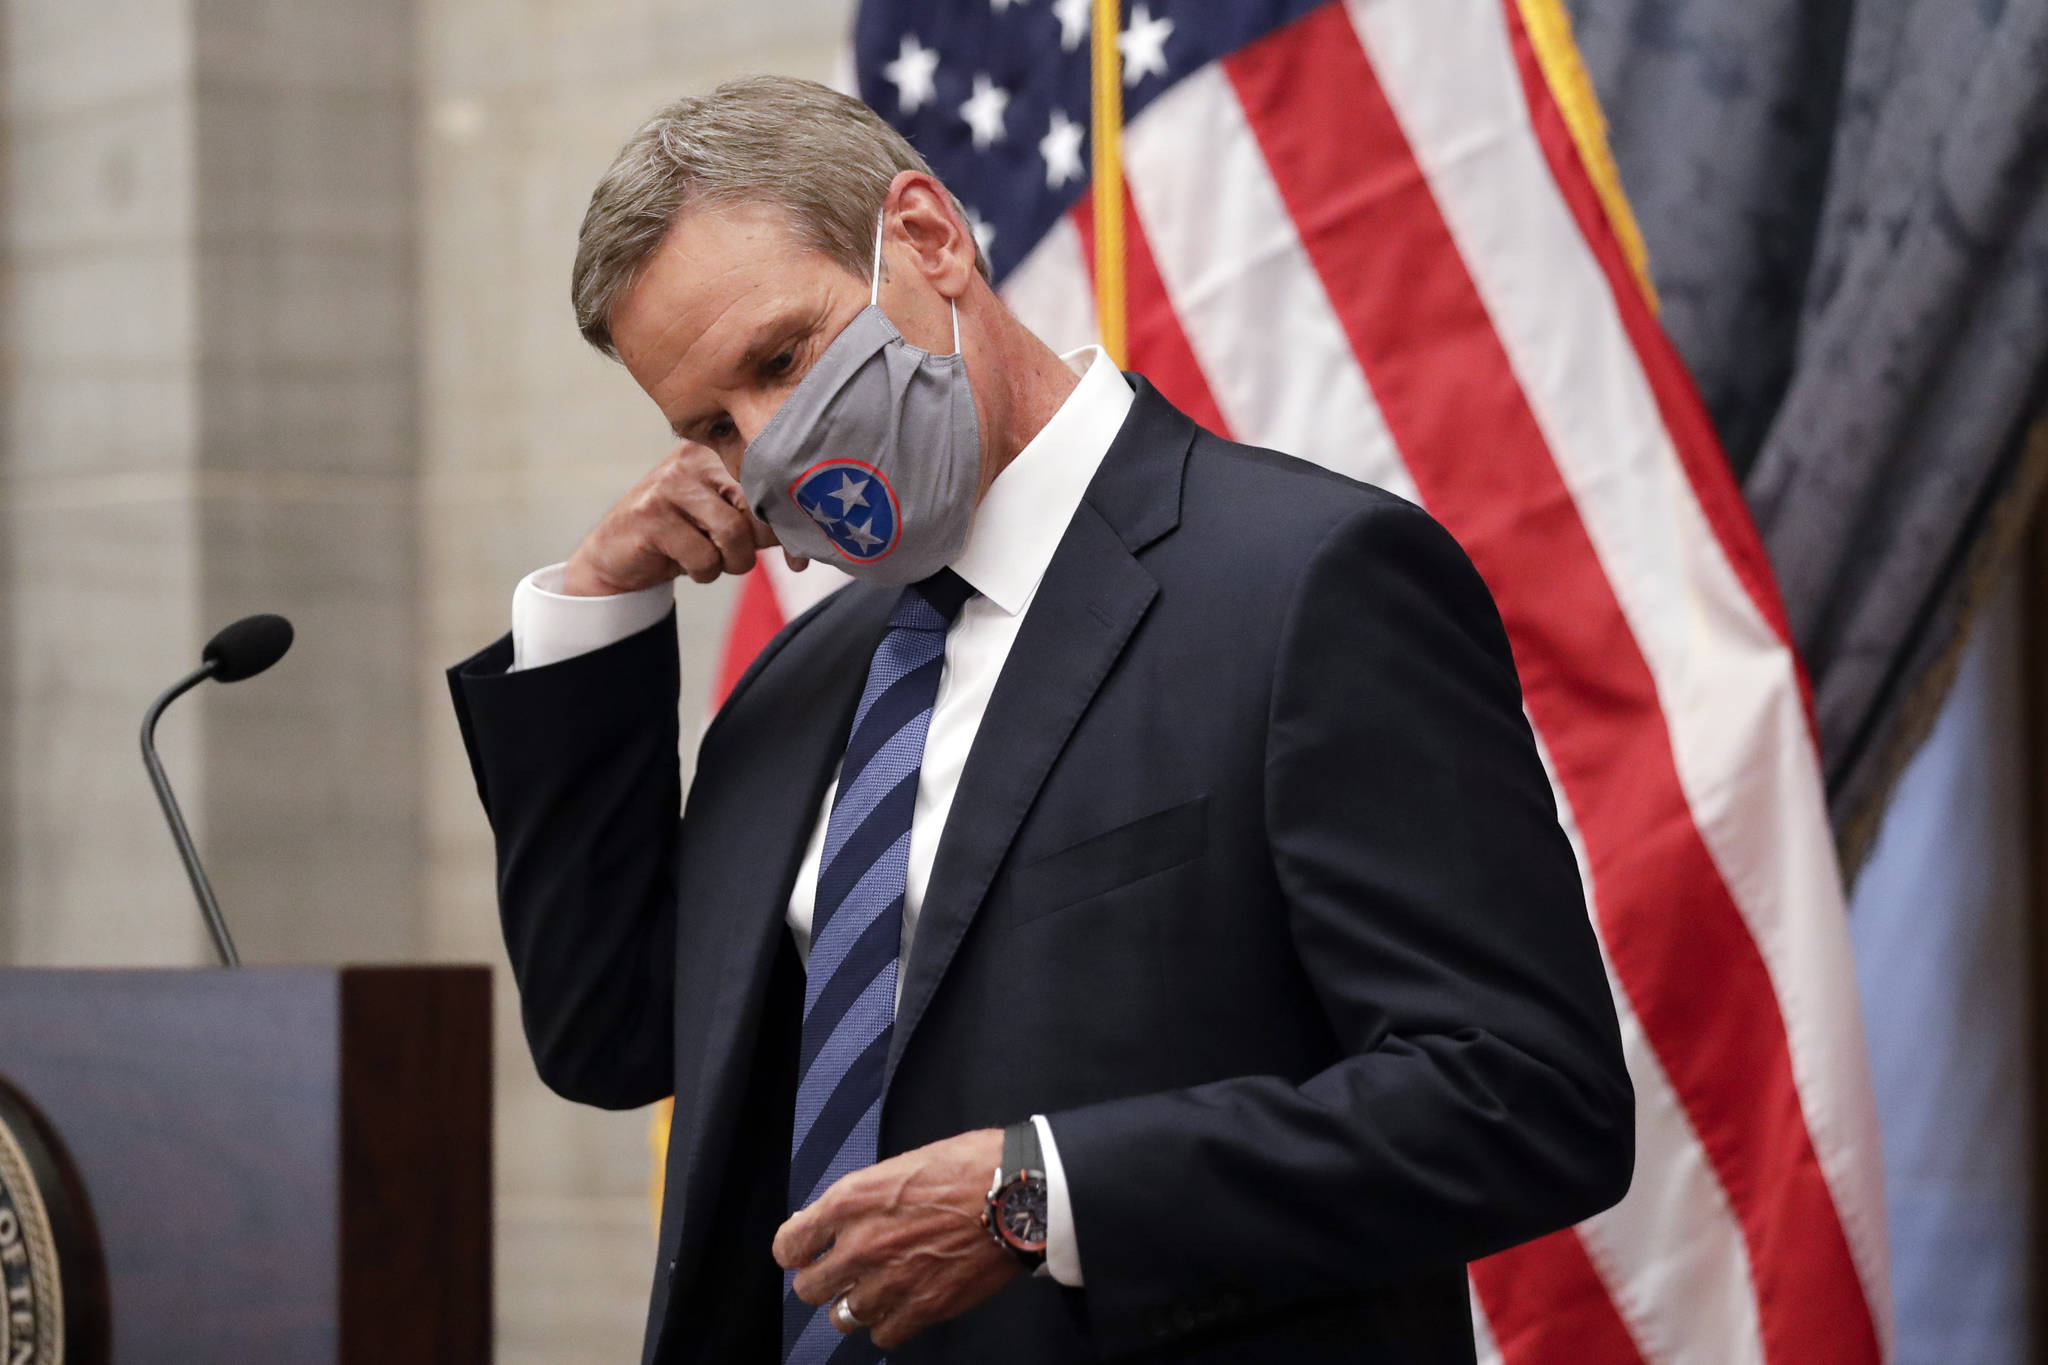 Tennessee Gov. Bill Lee removes his mask as he begins a news conference Wednesday, July 1, 2020, in Nashville, Tenn. (AP Photo | Mark Humphrey)